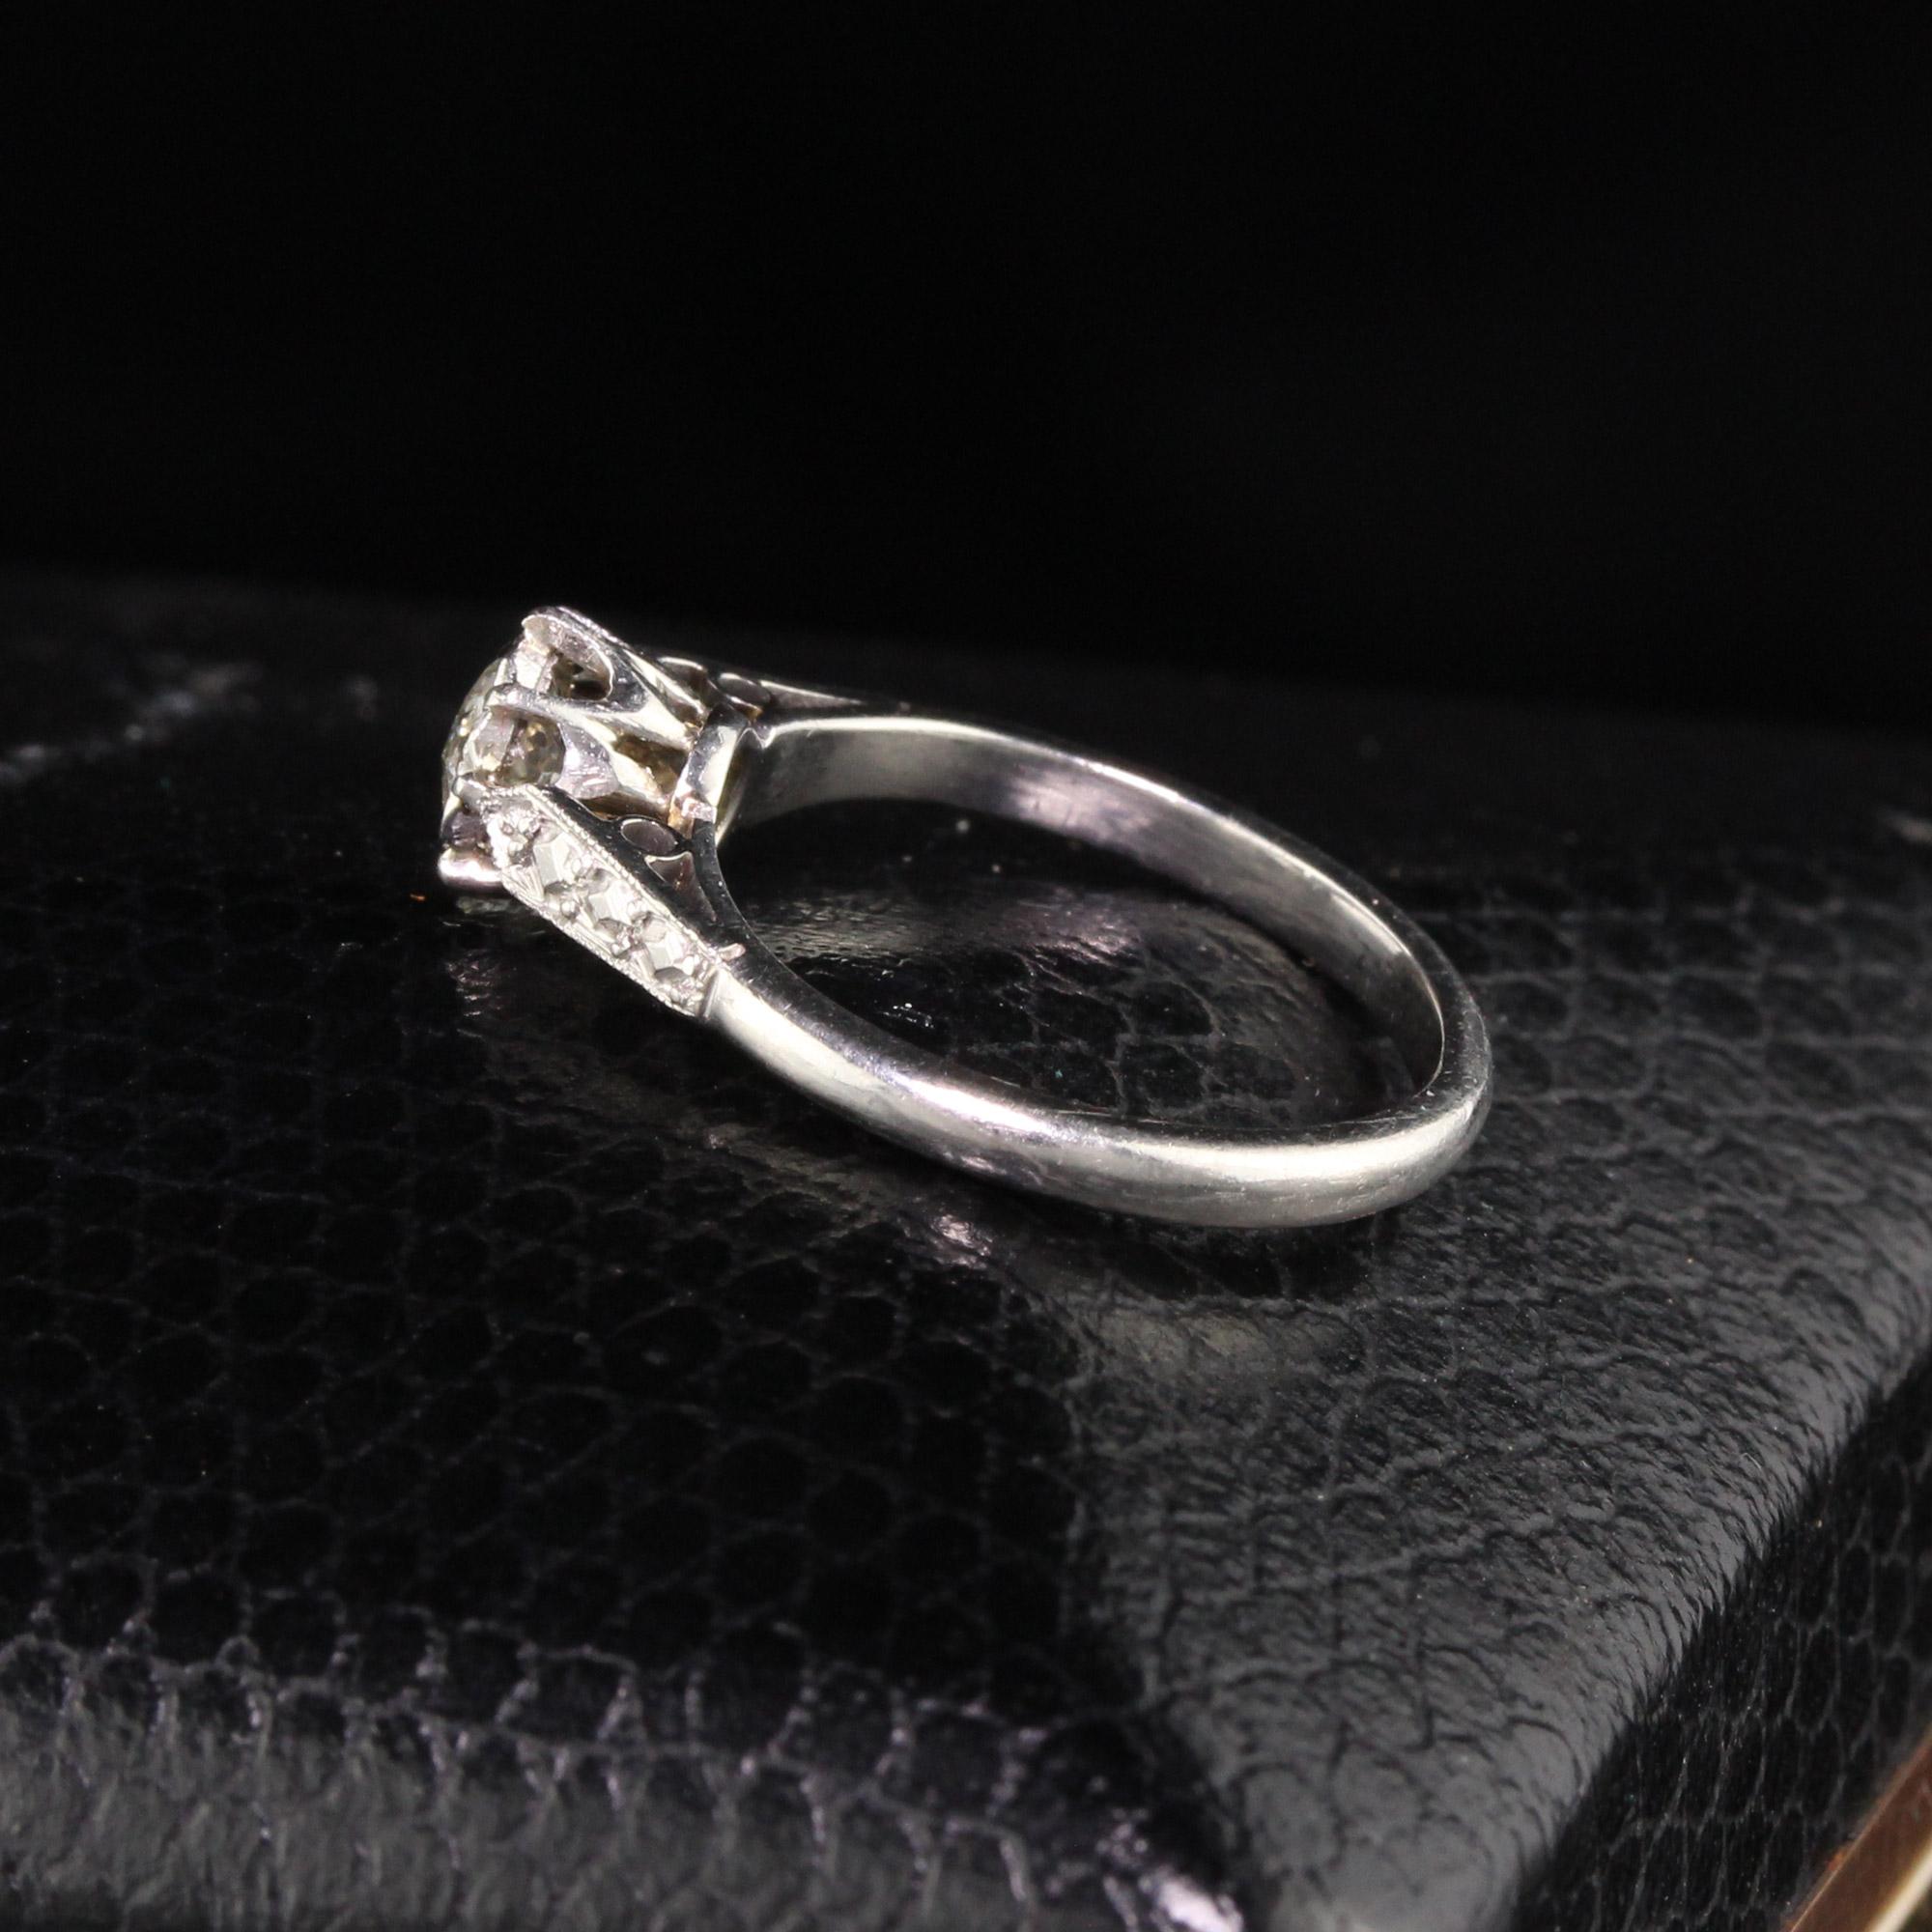 Gorgeous Antique Art Deco Platinum Old Mine Cut Diamond Engagement Ring. The center stone is an old mine cut diamond measuring approximately .45 cts and the mounting has diamond cut engravings on the sides to give the illusion of diamond